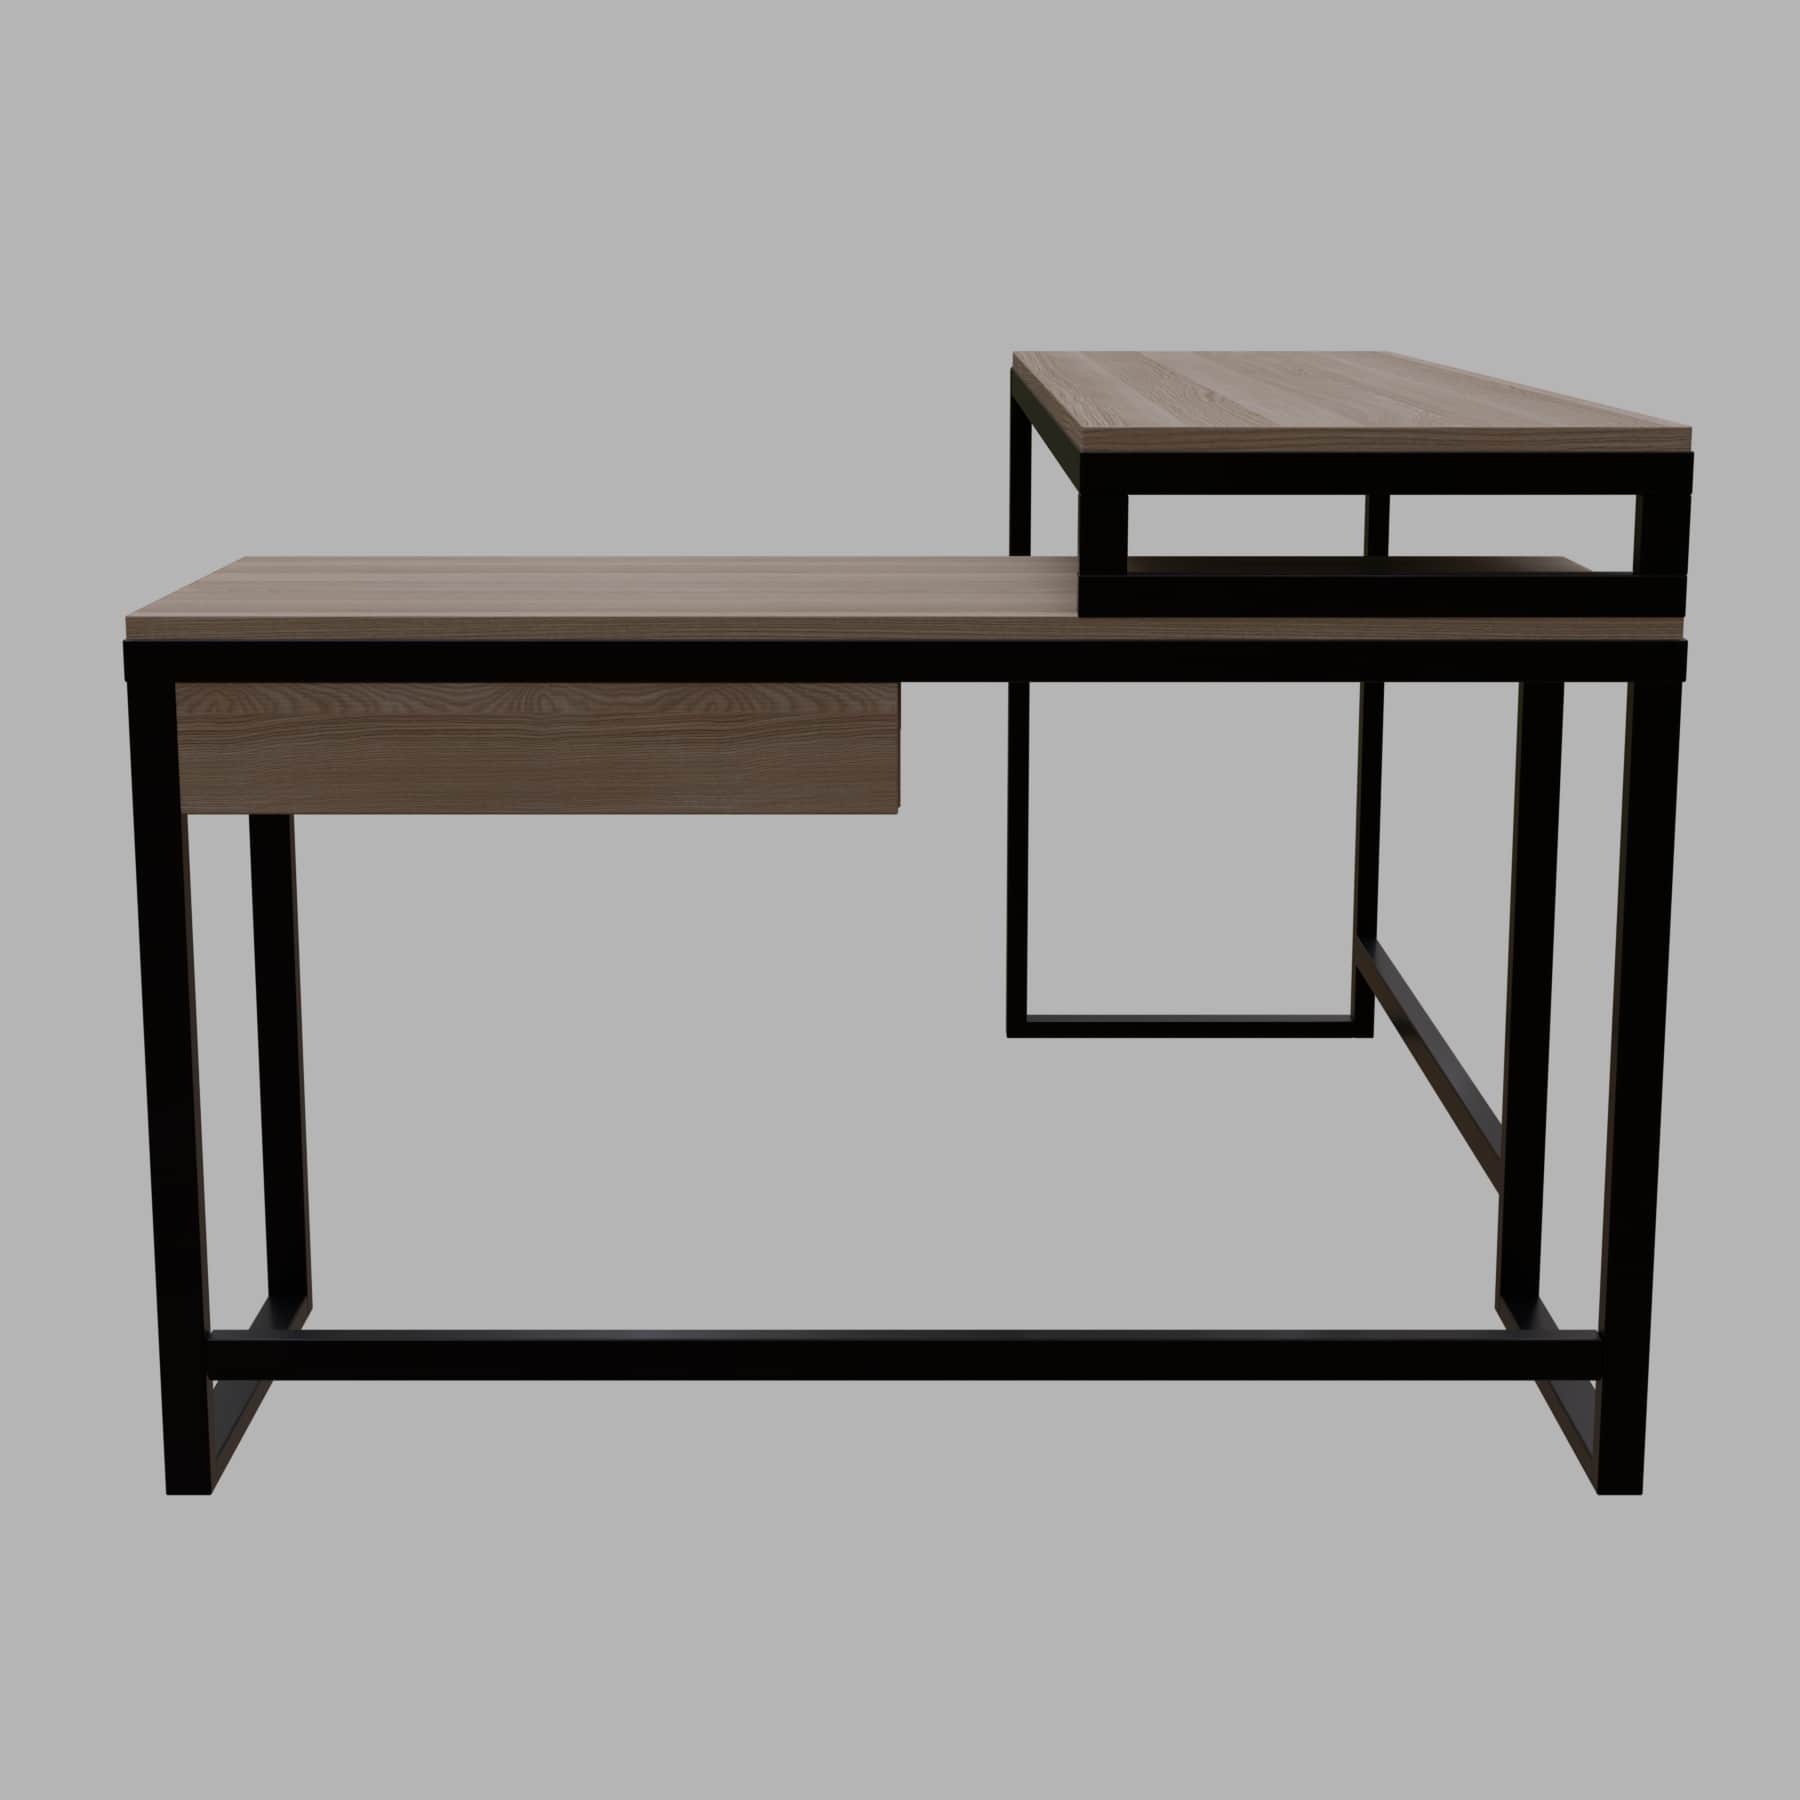 Enkele L Shaped Study Table with Storage Design in Wenge Color